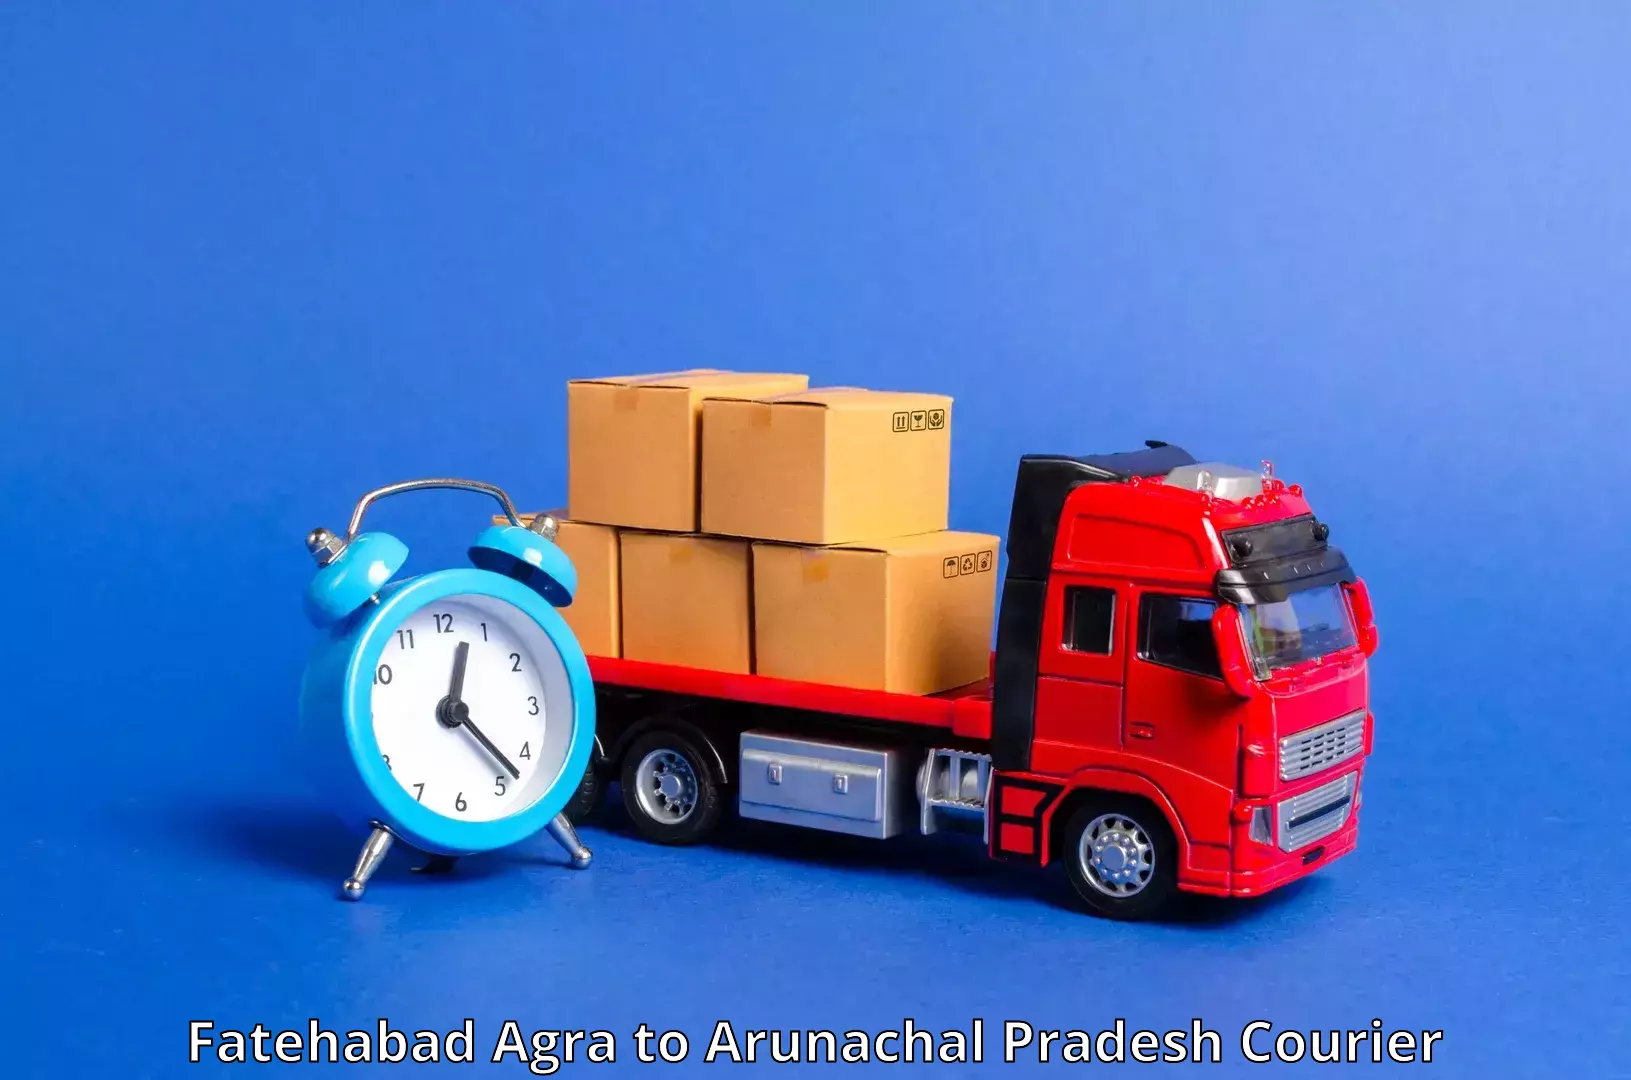 Next-day delivery options Fatehabad Agra to Changlang